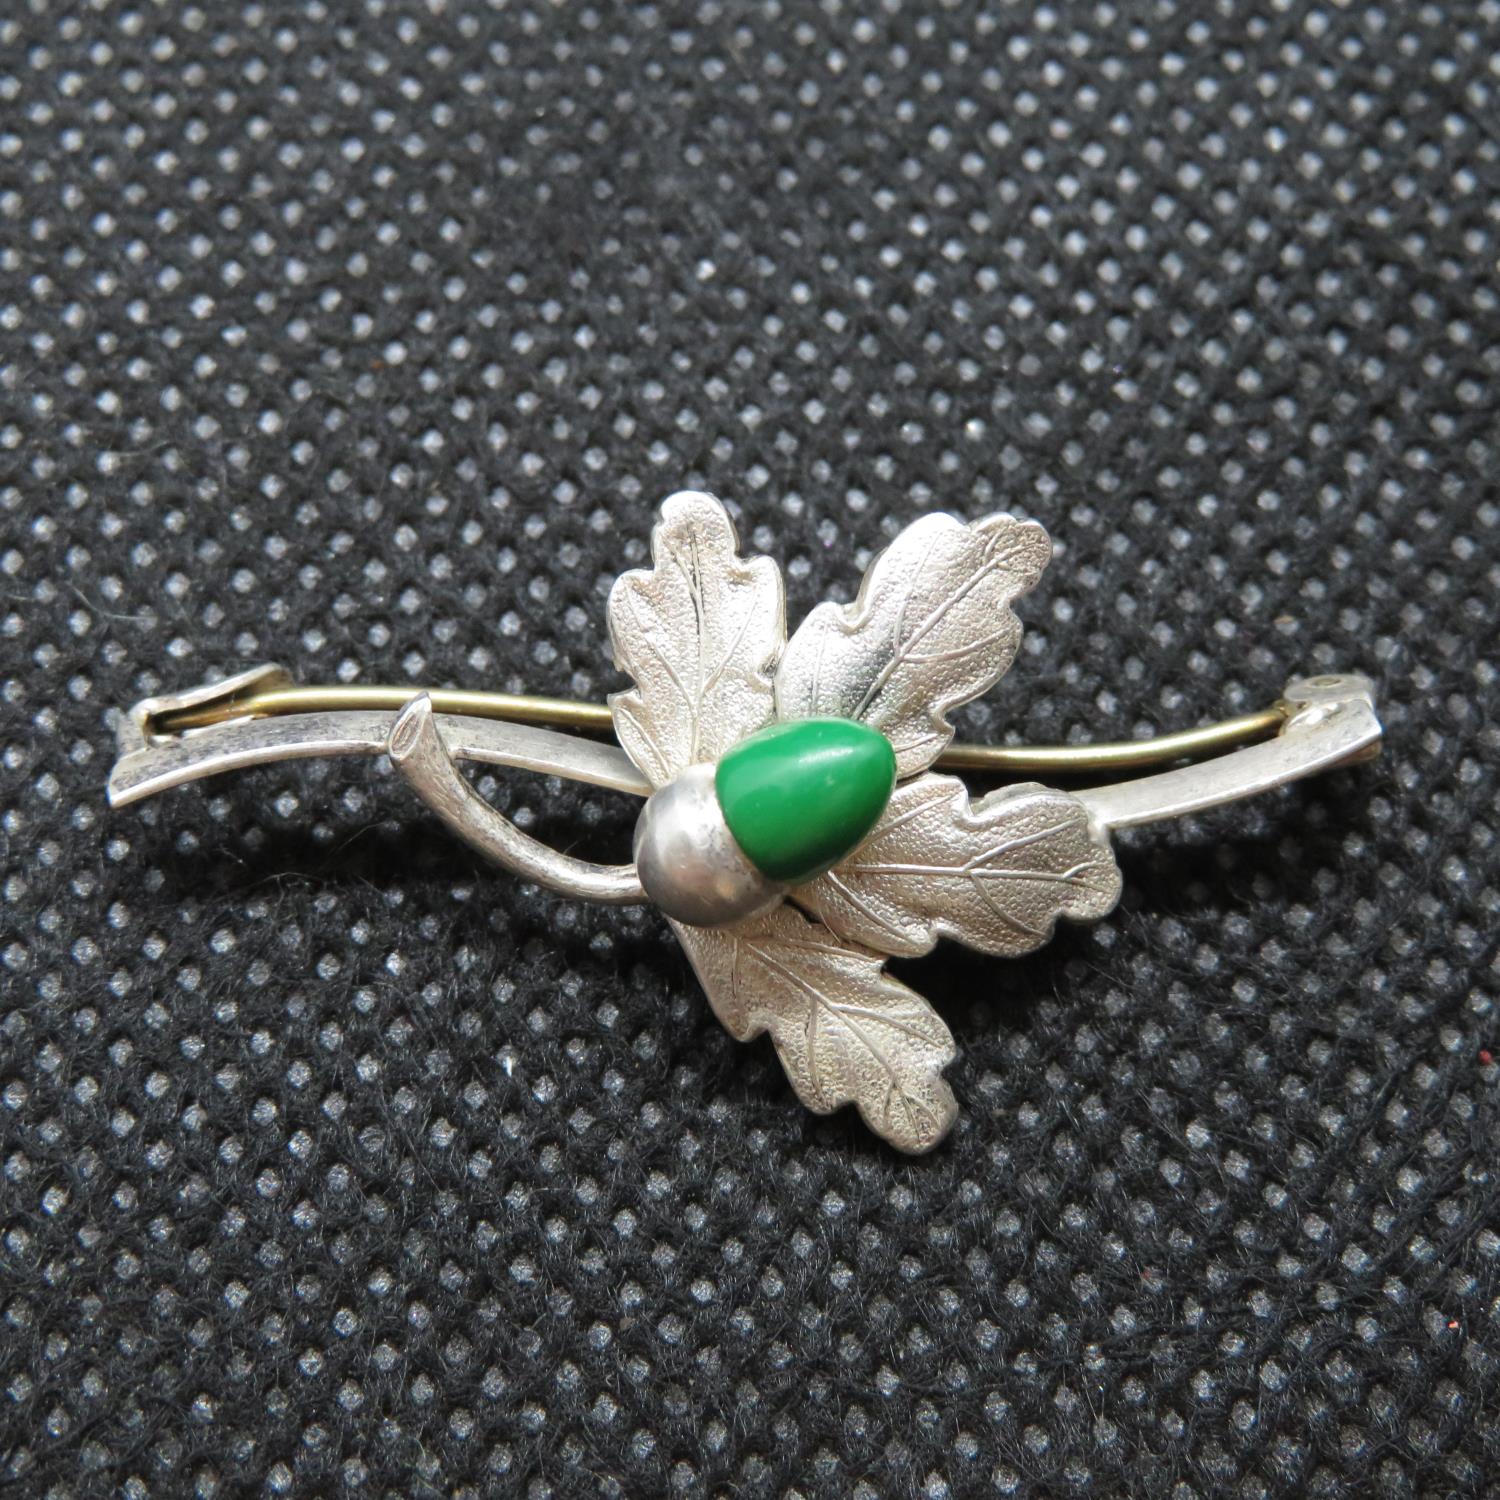 Antique silver acorn and leaf brooch by Charles Horner